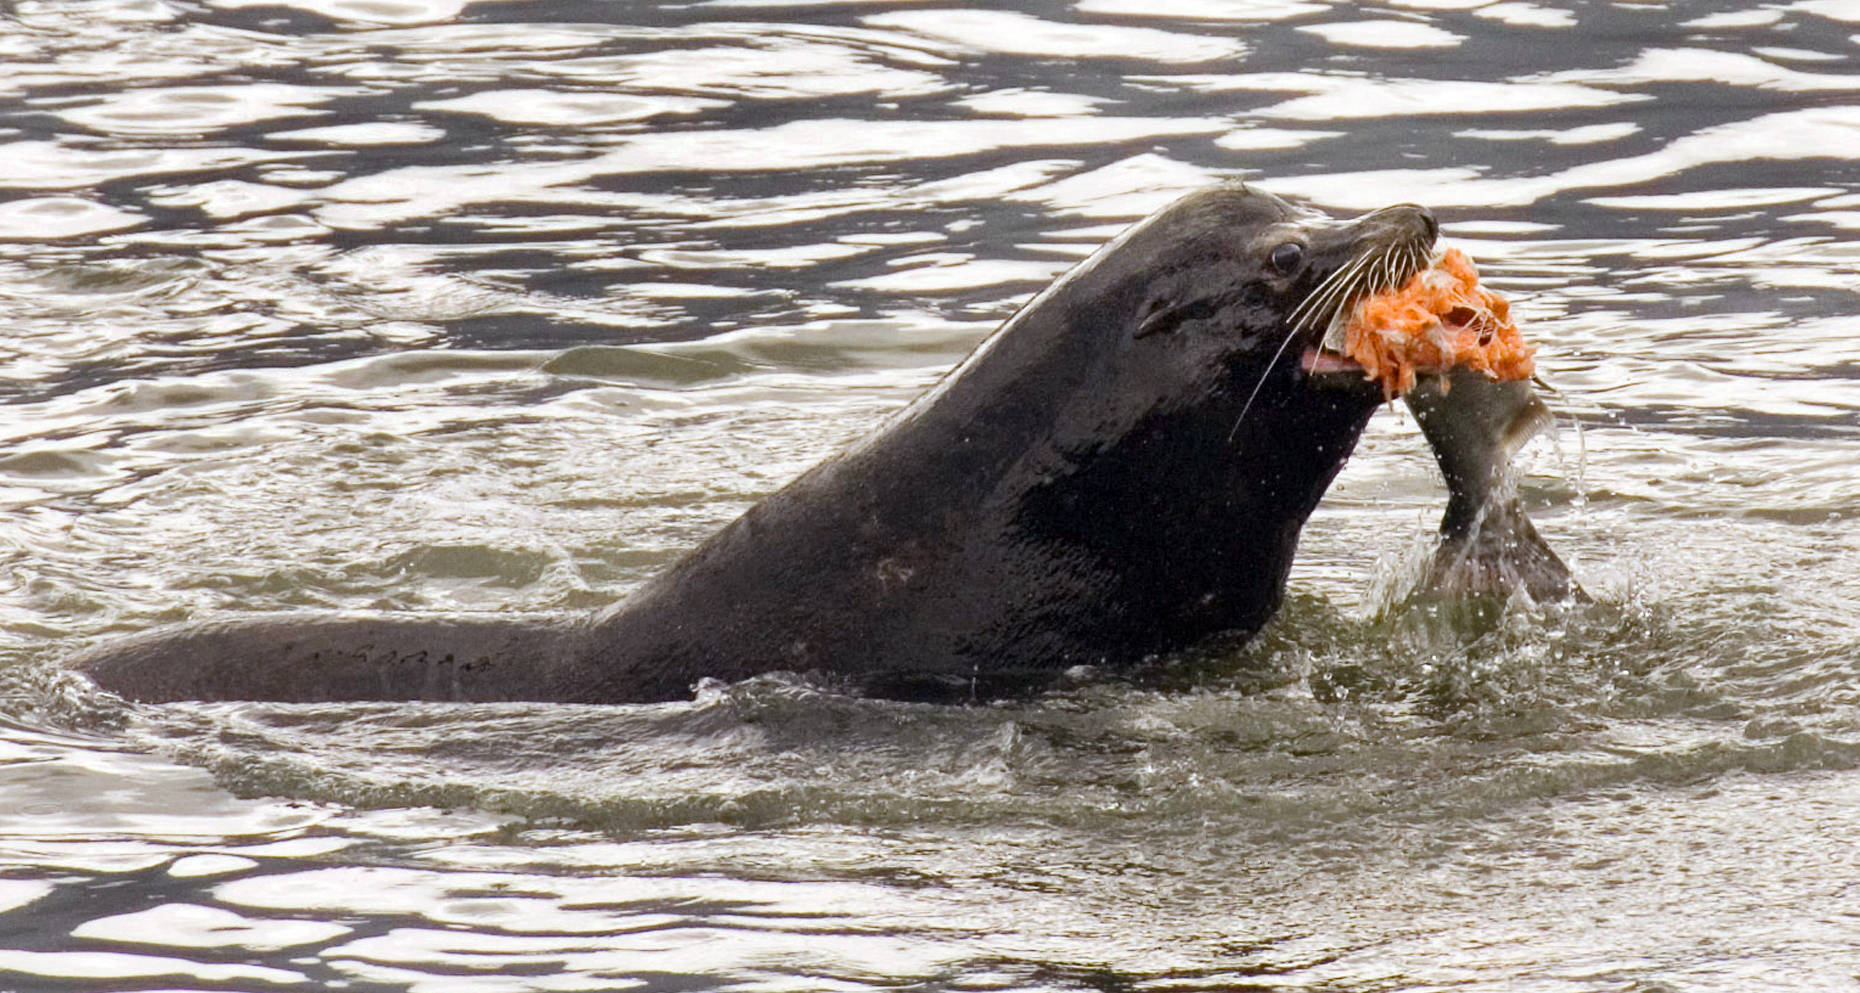 In this April 24, 2008 photo, a sea lion eats a salmon in the Columbia River near Bonneville Dam in North Bonneville, Washington. Two species of fish listed as threatened under the Endangered Species Act are facing a growing challenge in Oregon from hungry sea lions. The federally protected California sea lions are traveling into the Columbia River and its tributaries to snack on fragile fish populations. After a decade killing the hungriest sea lions in one area, wildlife officials now want to expand the program. (Don Ryan | The Associated Press File)